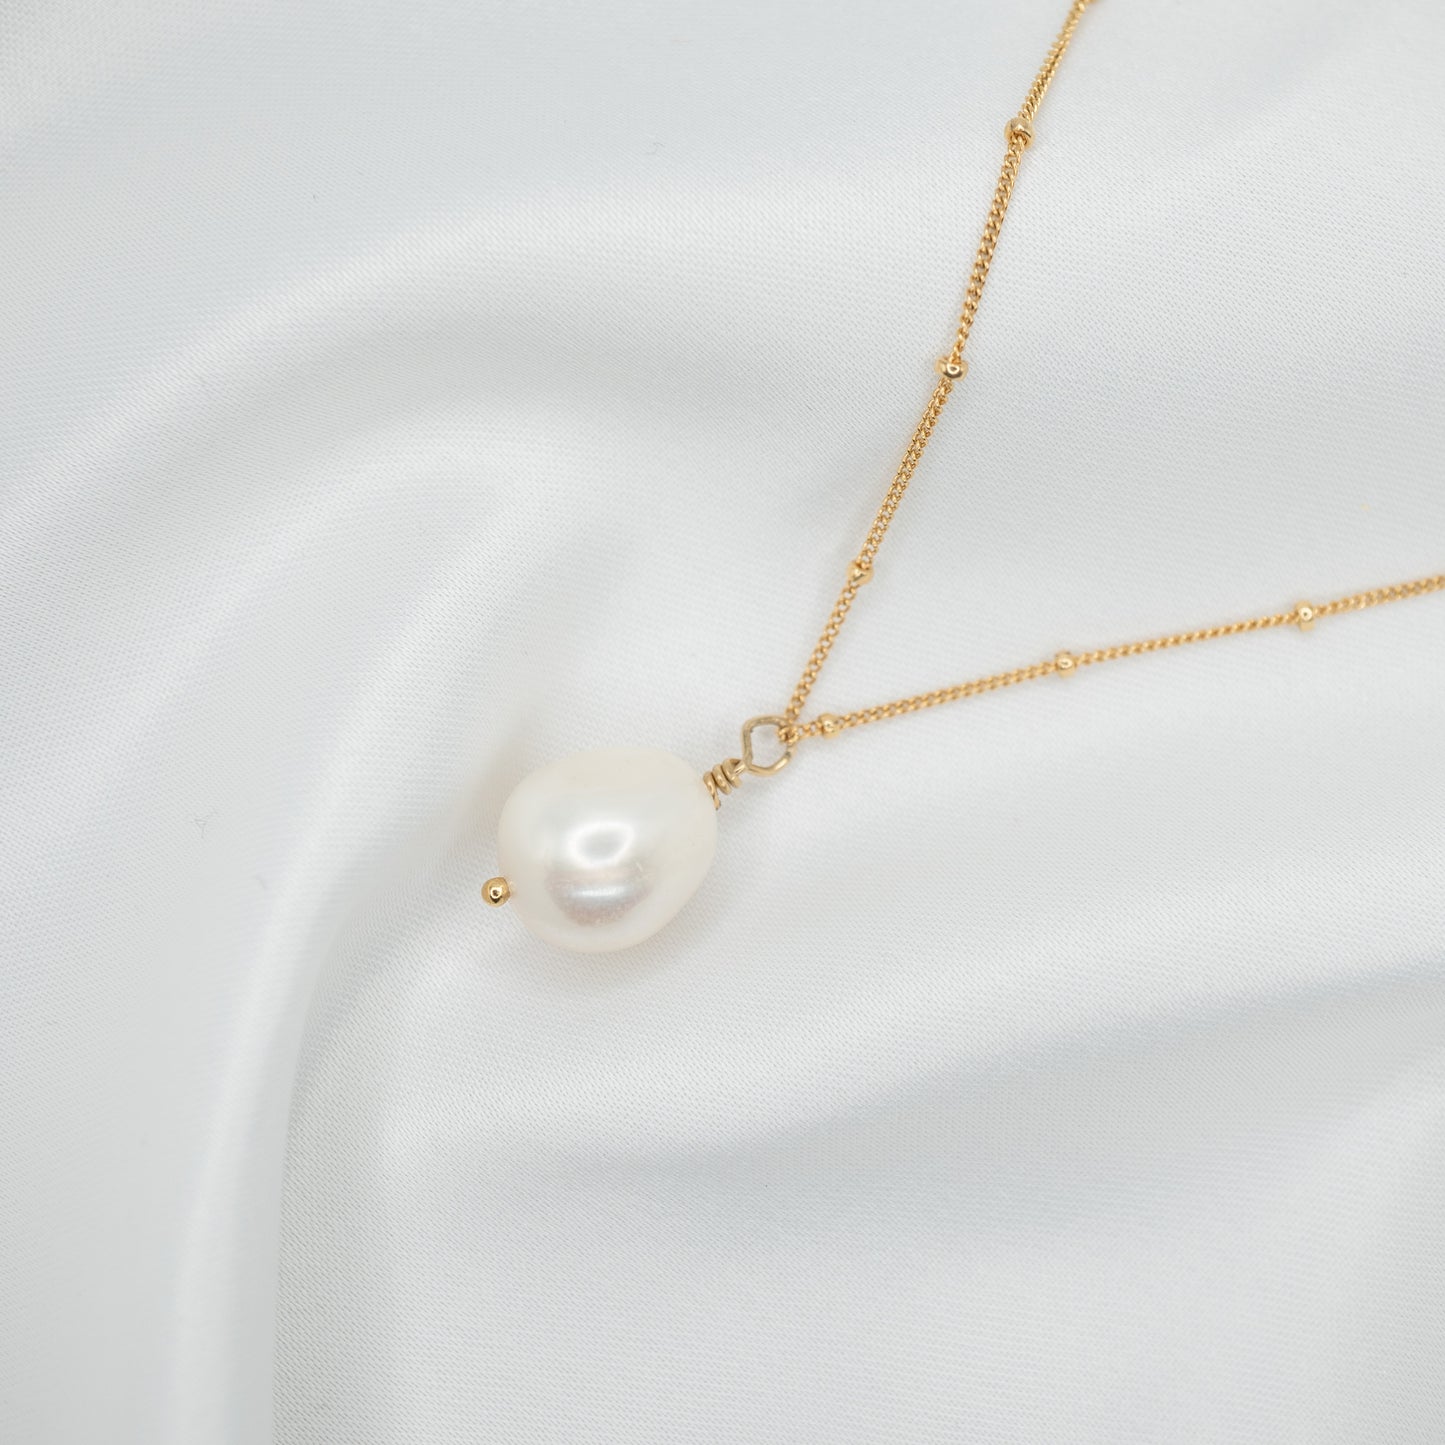 Gold Filled Baroque Pearl Pendant and Satellite Necklace - shot on white